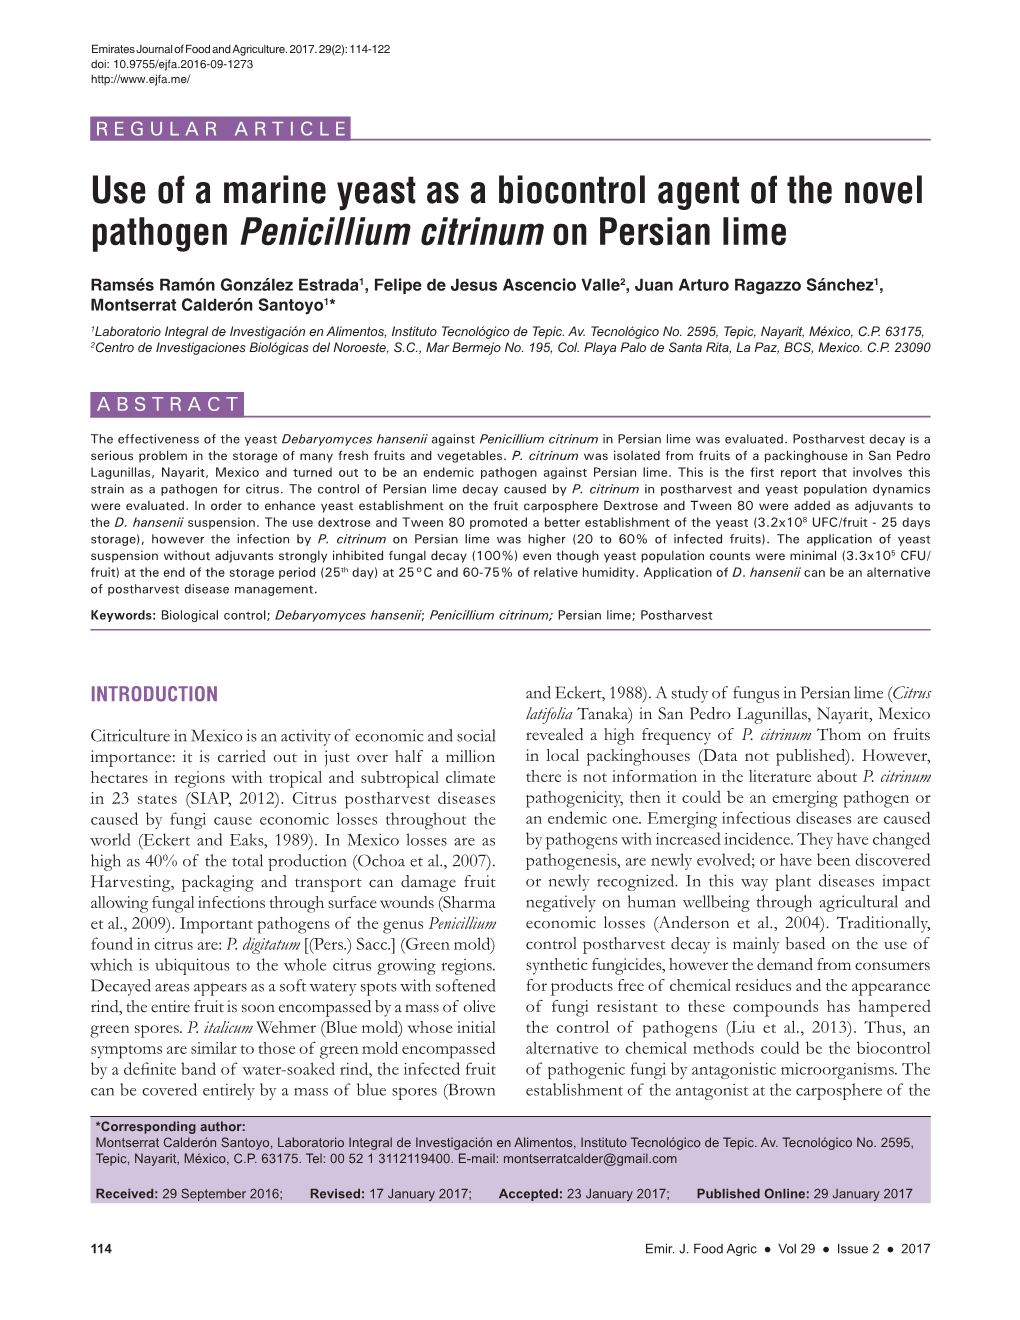 Use of a Marine Yeast As a Biocontrol Agent of the Novel Pathogen Penicillium Citrinum on Persian Lime